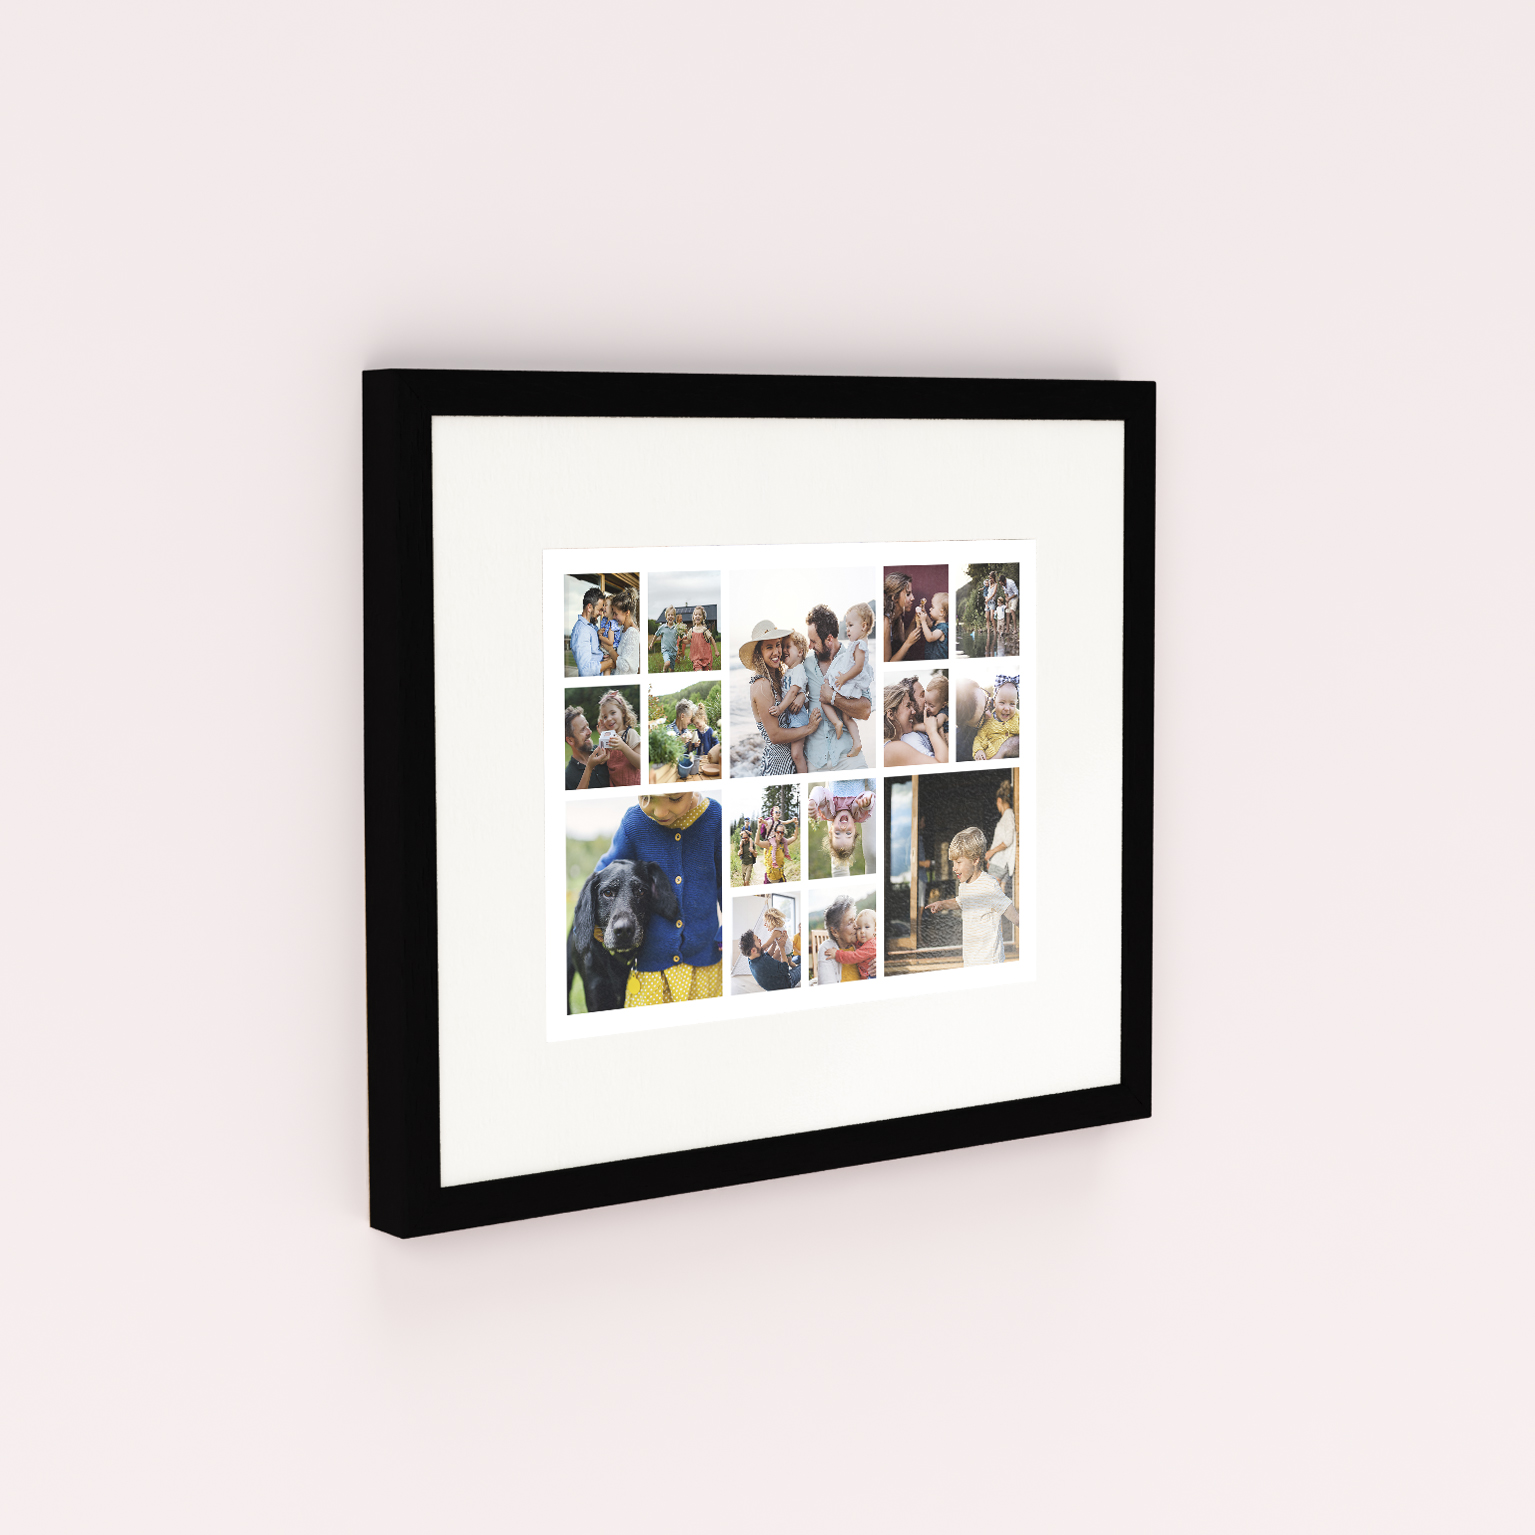 Memories Overload Framed Photo Prints - Embrace the abundance of memories with this landscape-oriented frame, customised with 10+ cherished photos. Add a personal touch that reflects your individuality. Perfect for those with a wealth of memories, these framed prints are an ideal keepsake to treasure and share special moments in a beautiful and meaningful way.